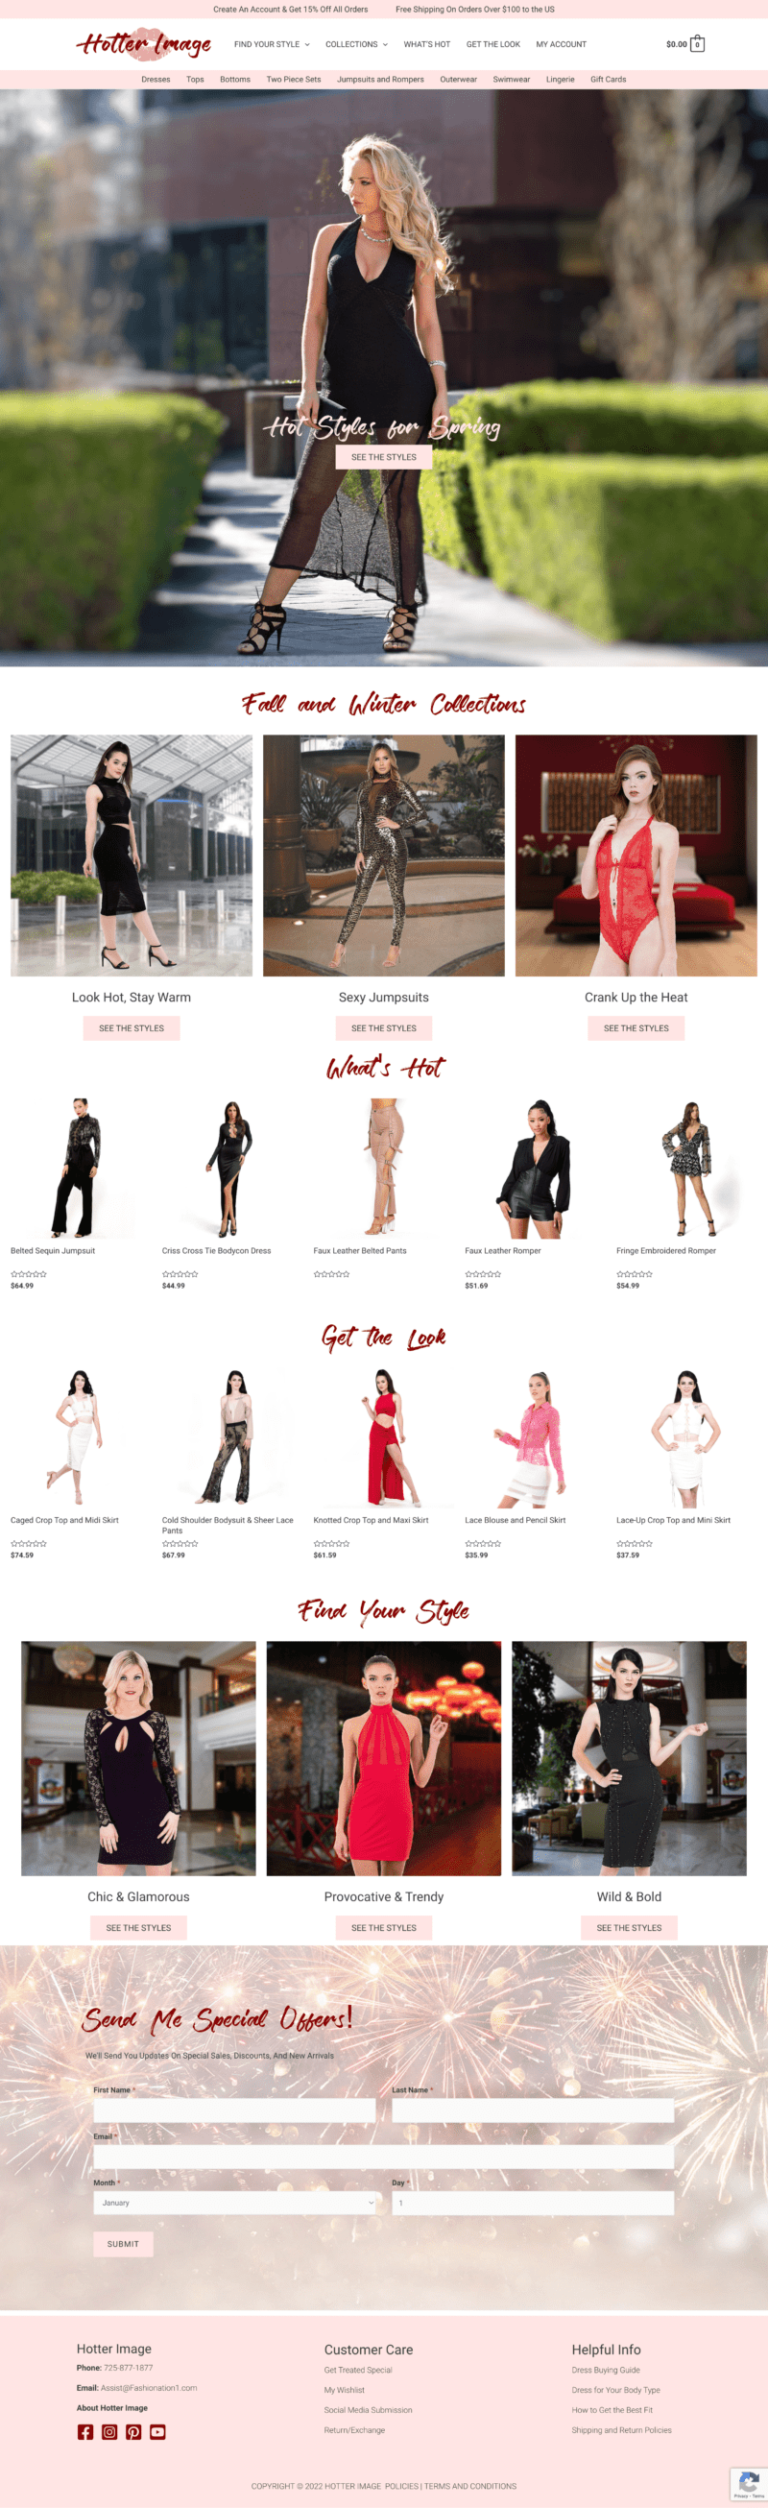 Online fashion clothing store website development and design